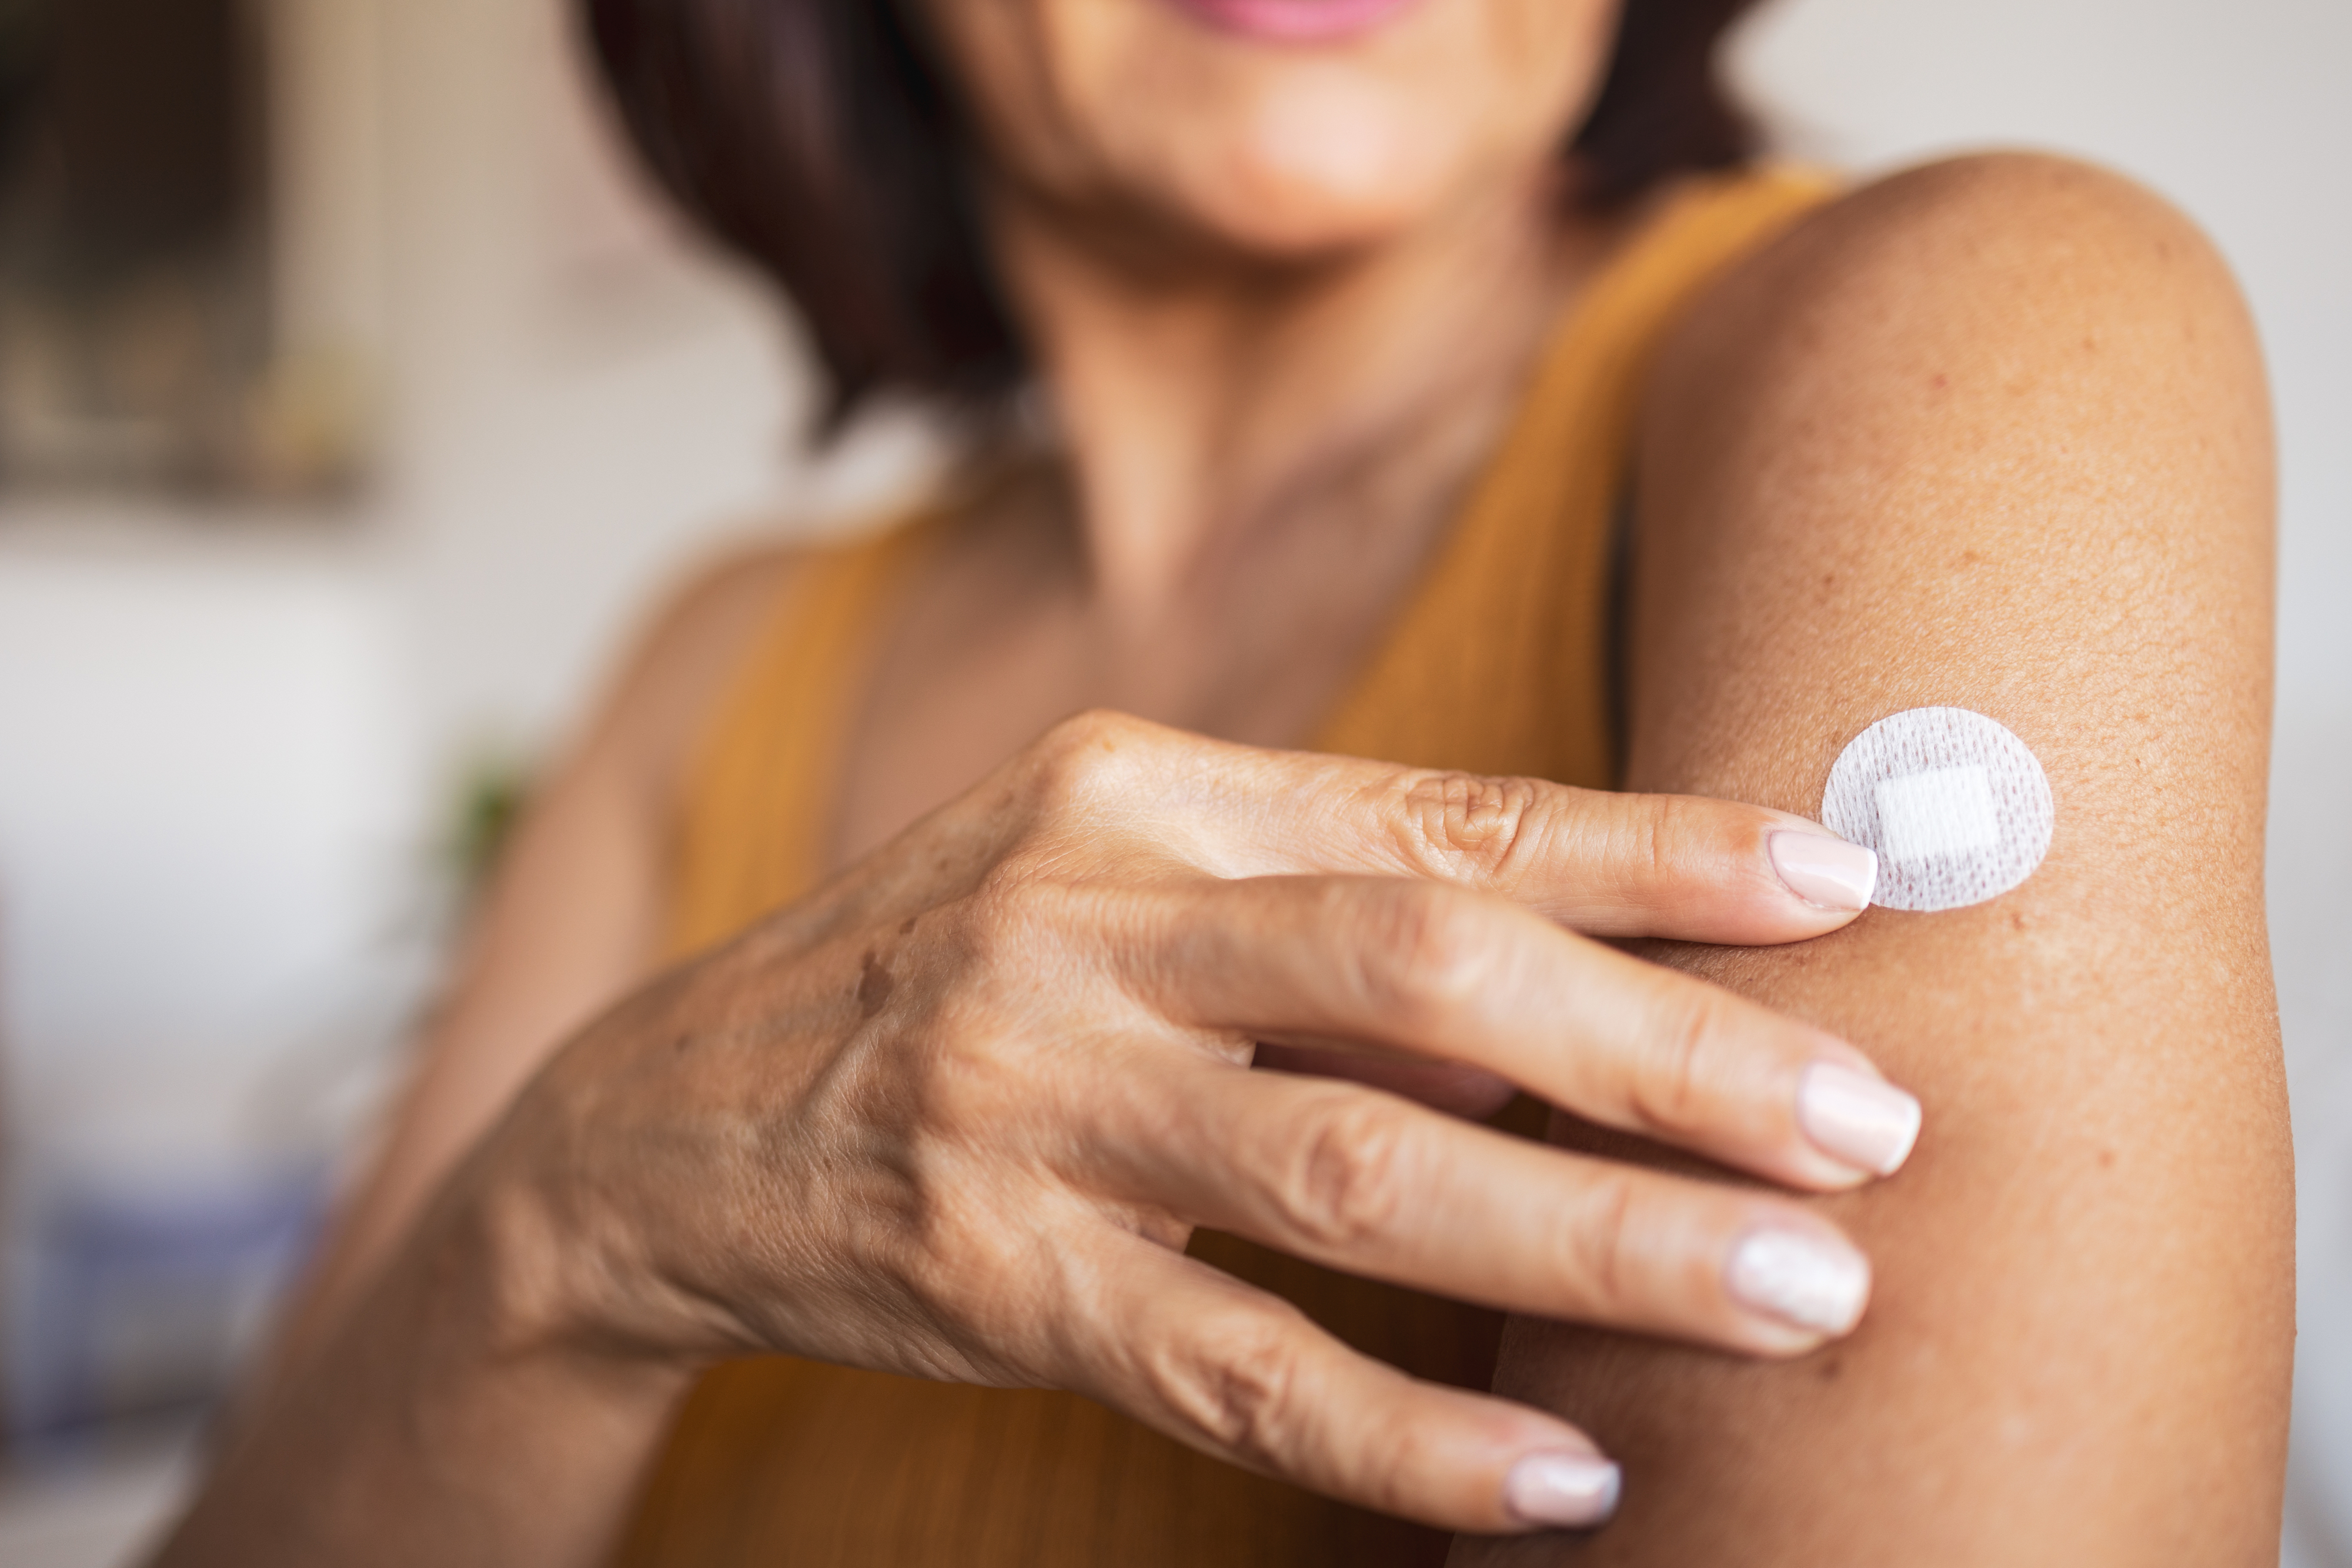 Woman attaching a hormone replacement patch to her upper arm